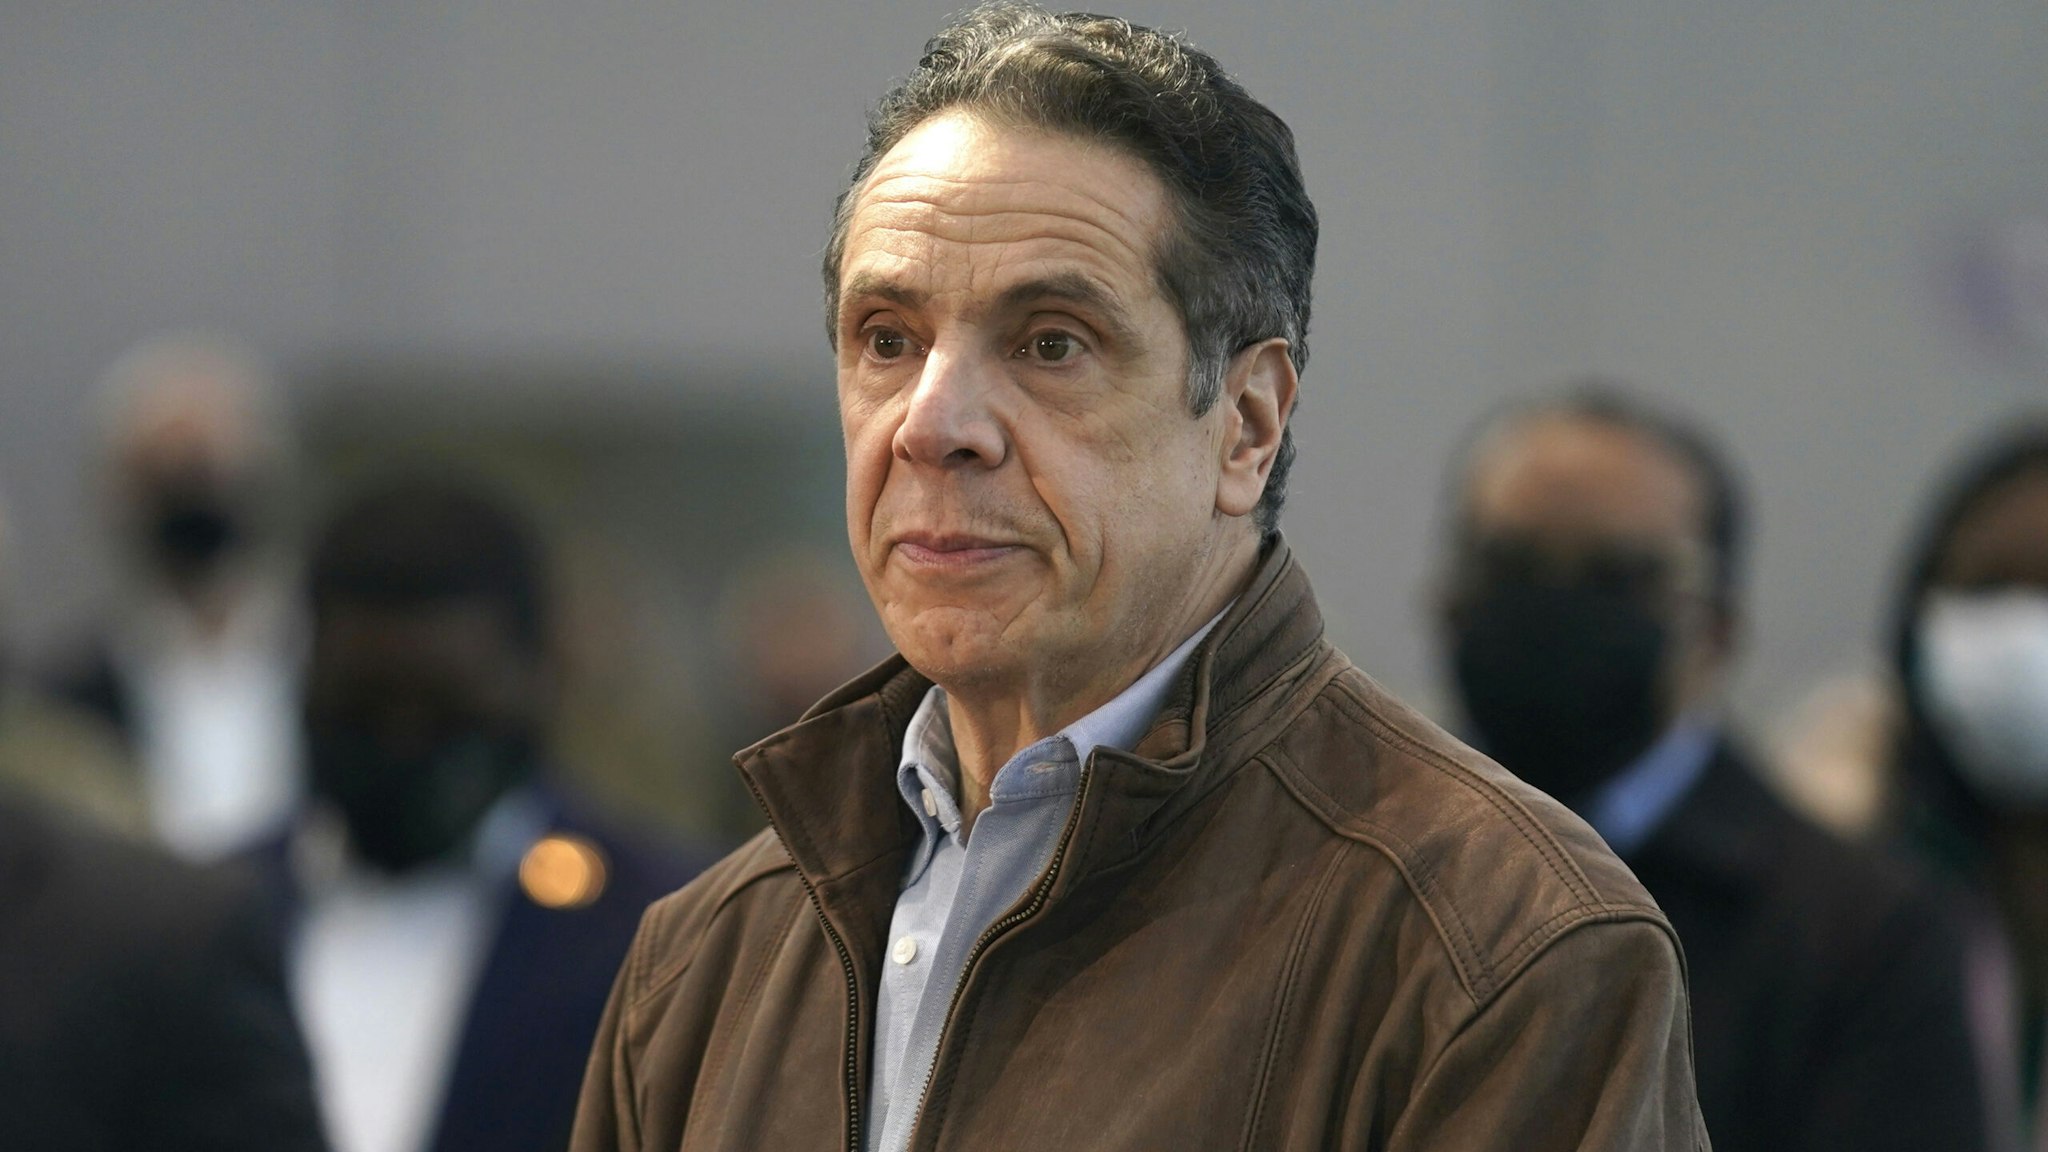 NEW YORK, NEW YORK - MARCH 08: New York Gov. Andrew Cuomo speaks at a vaccination site at the Jacob K. Javits Convention Center on March 8, 2021 in New York City. Cuomo has been called to resign from his position after allegations of sexual misconduct were brought against him.